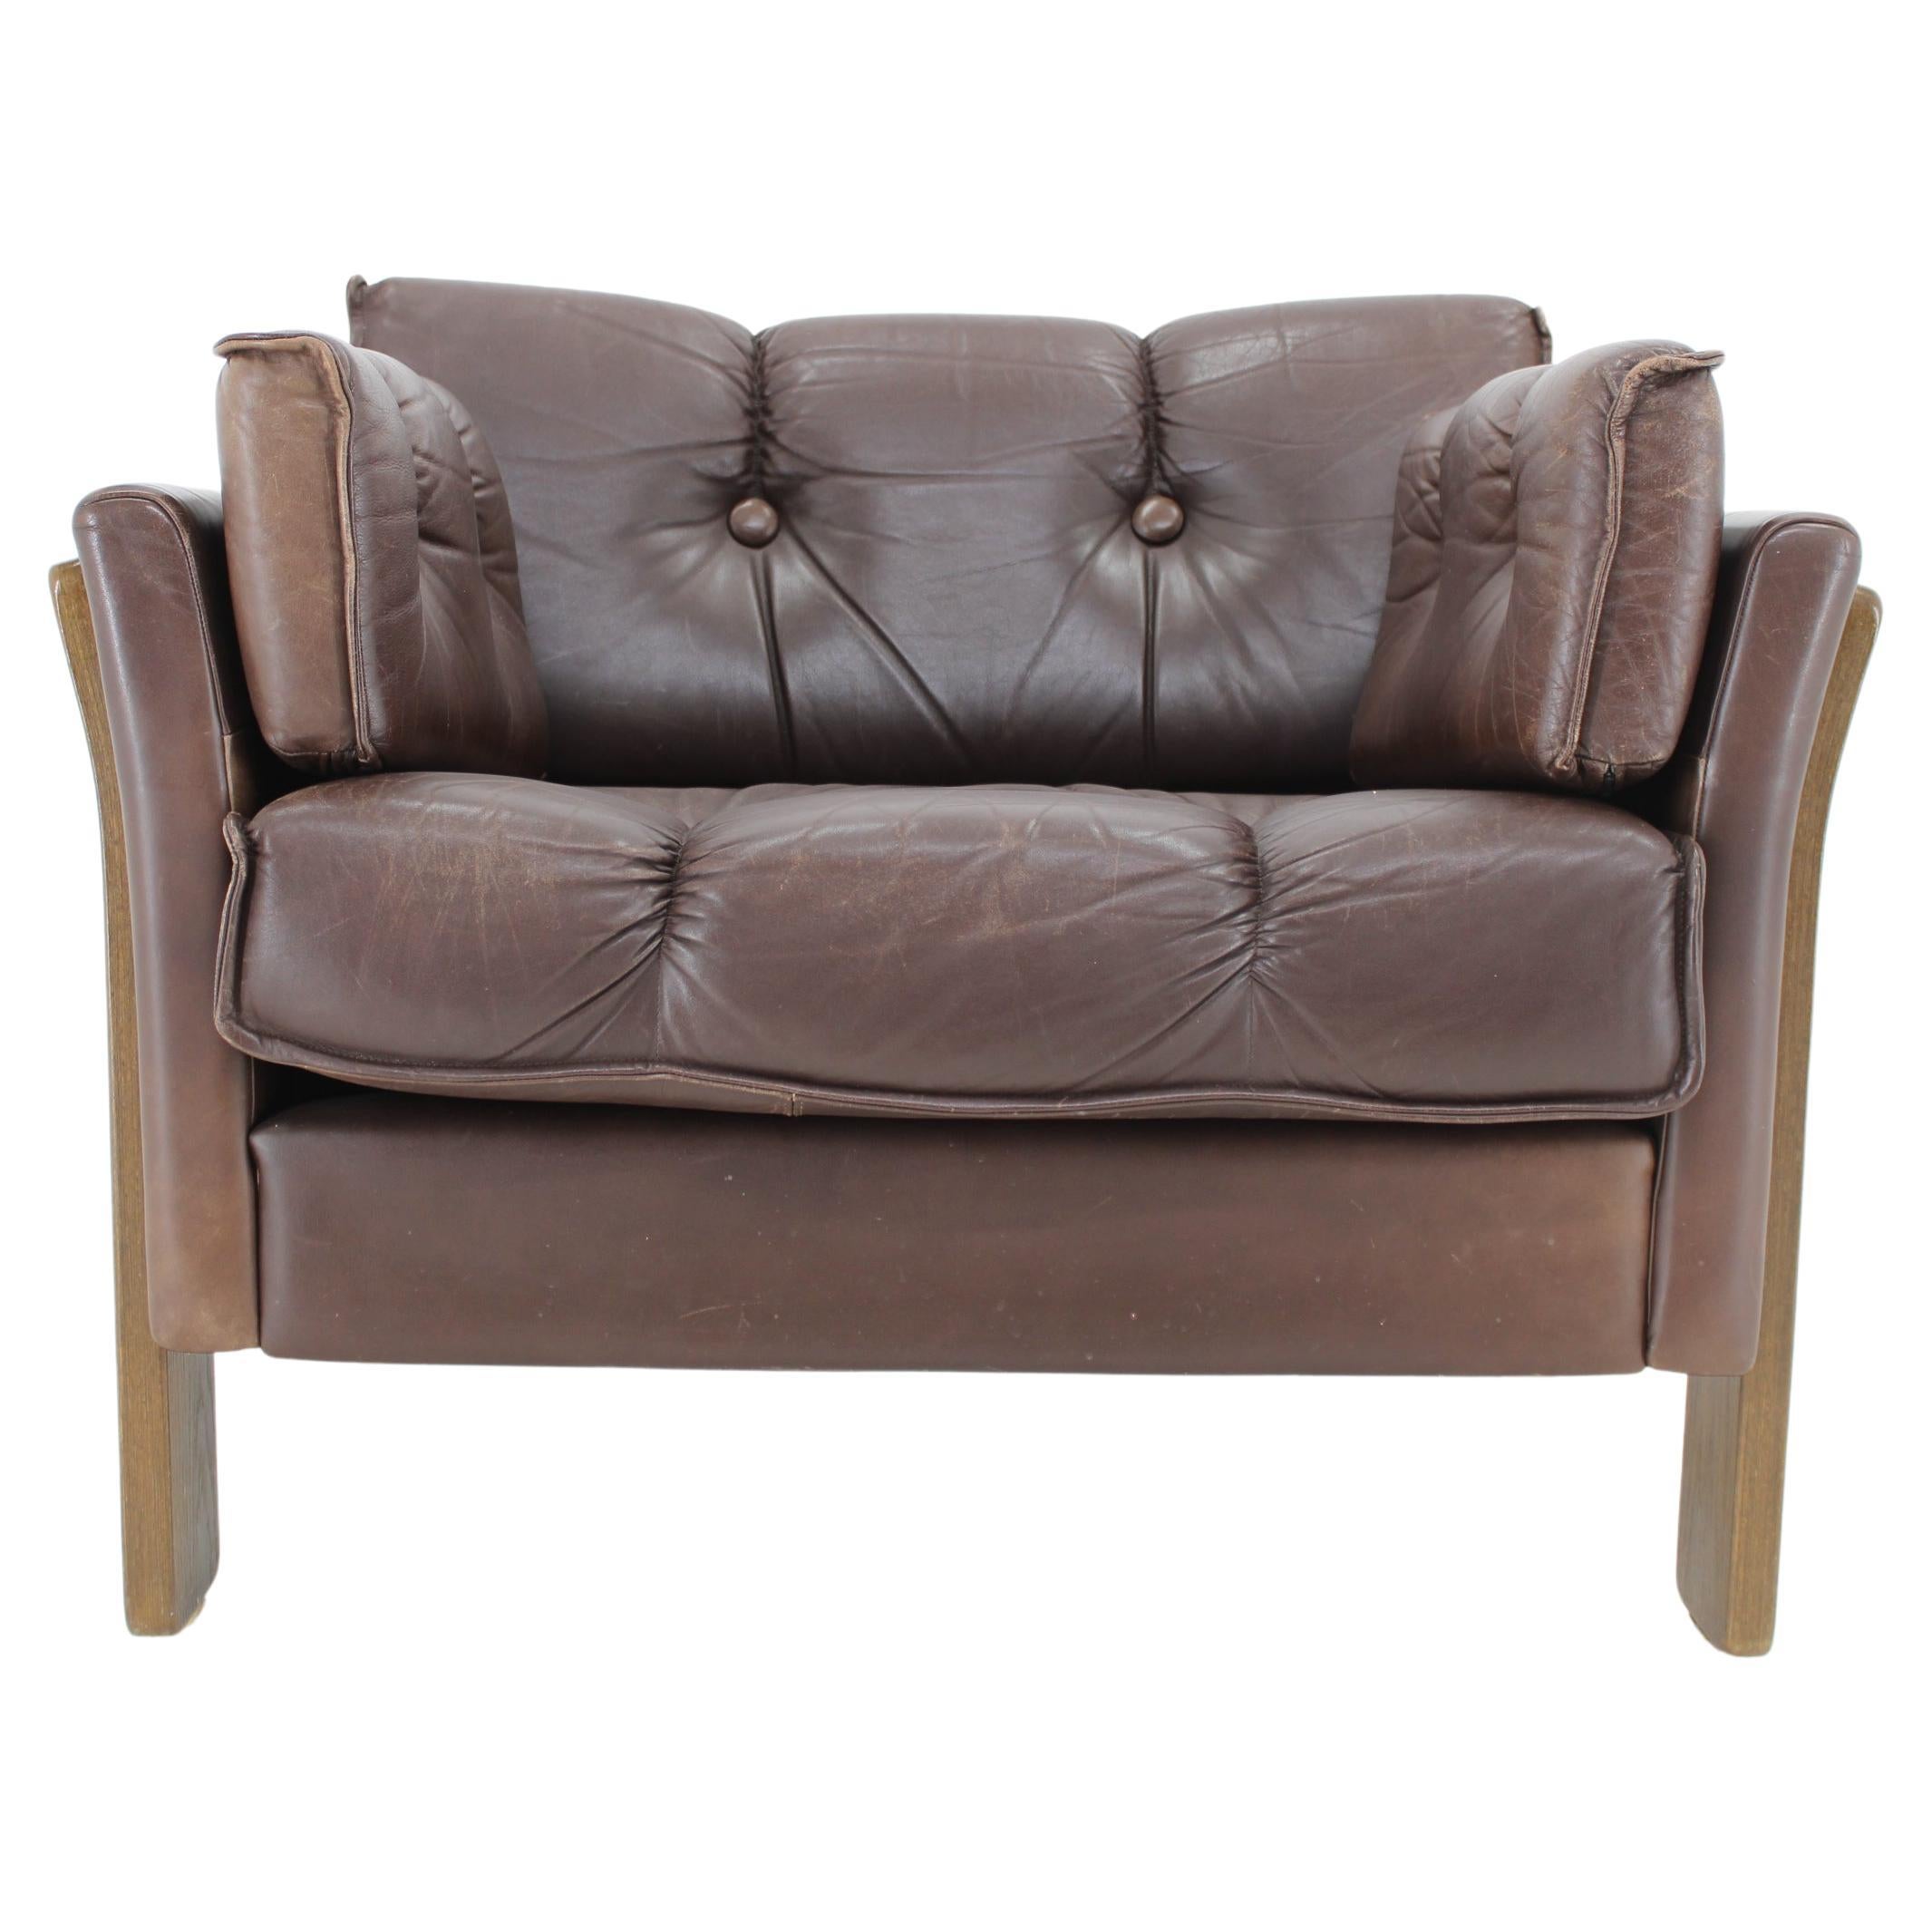 1970s Brown Leather 3-Seater Sofa, Denmark 